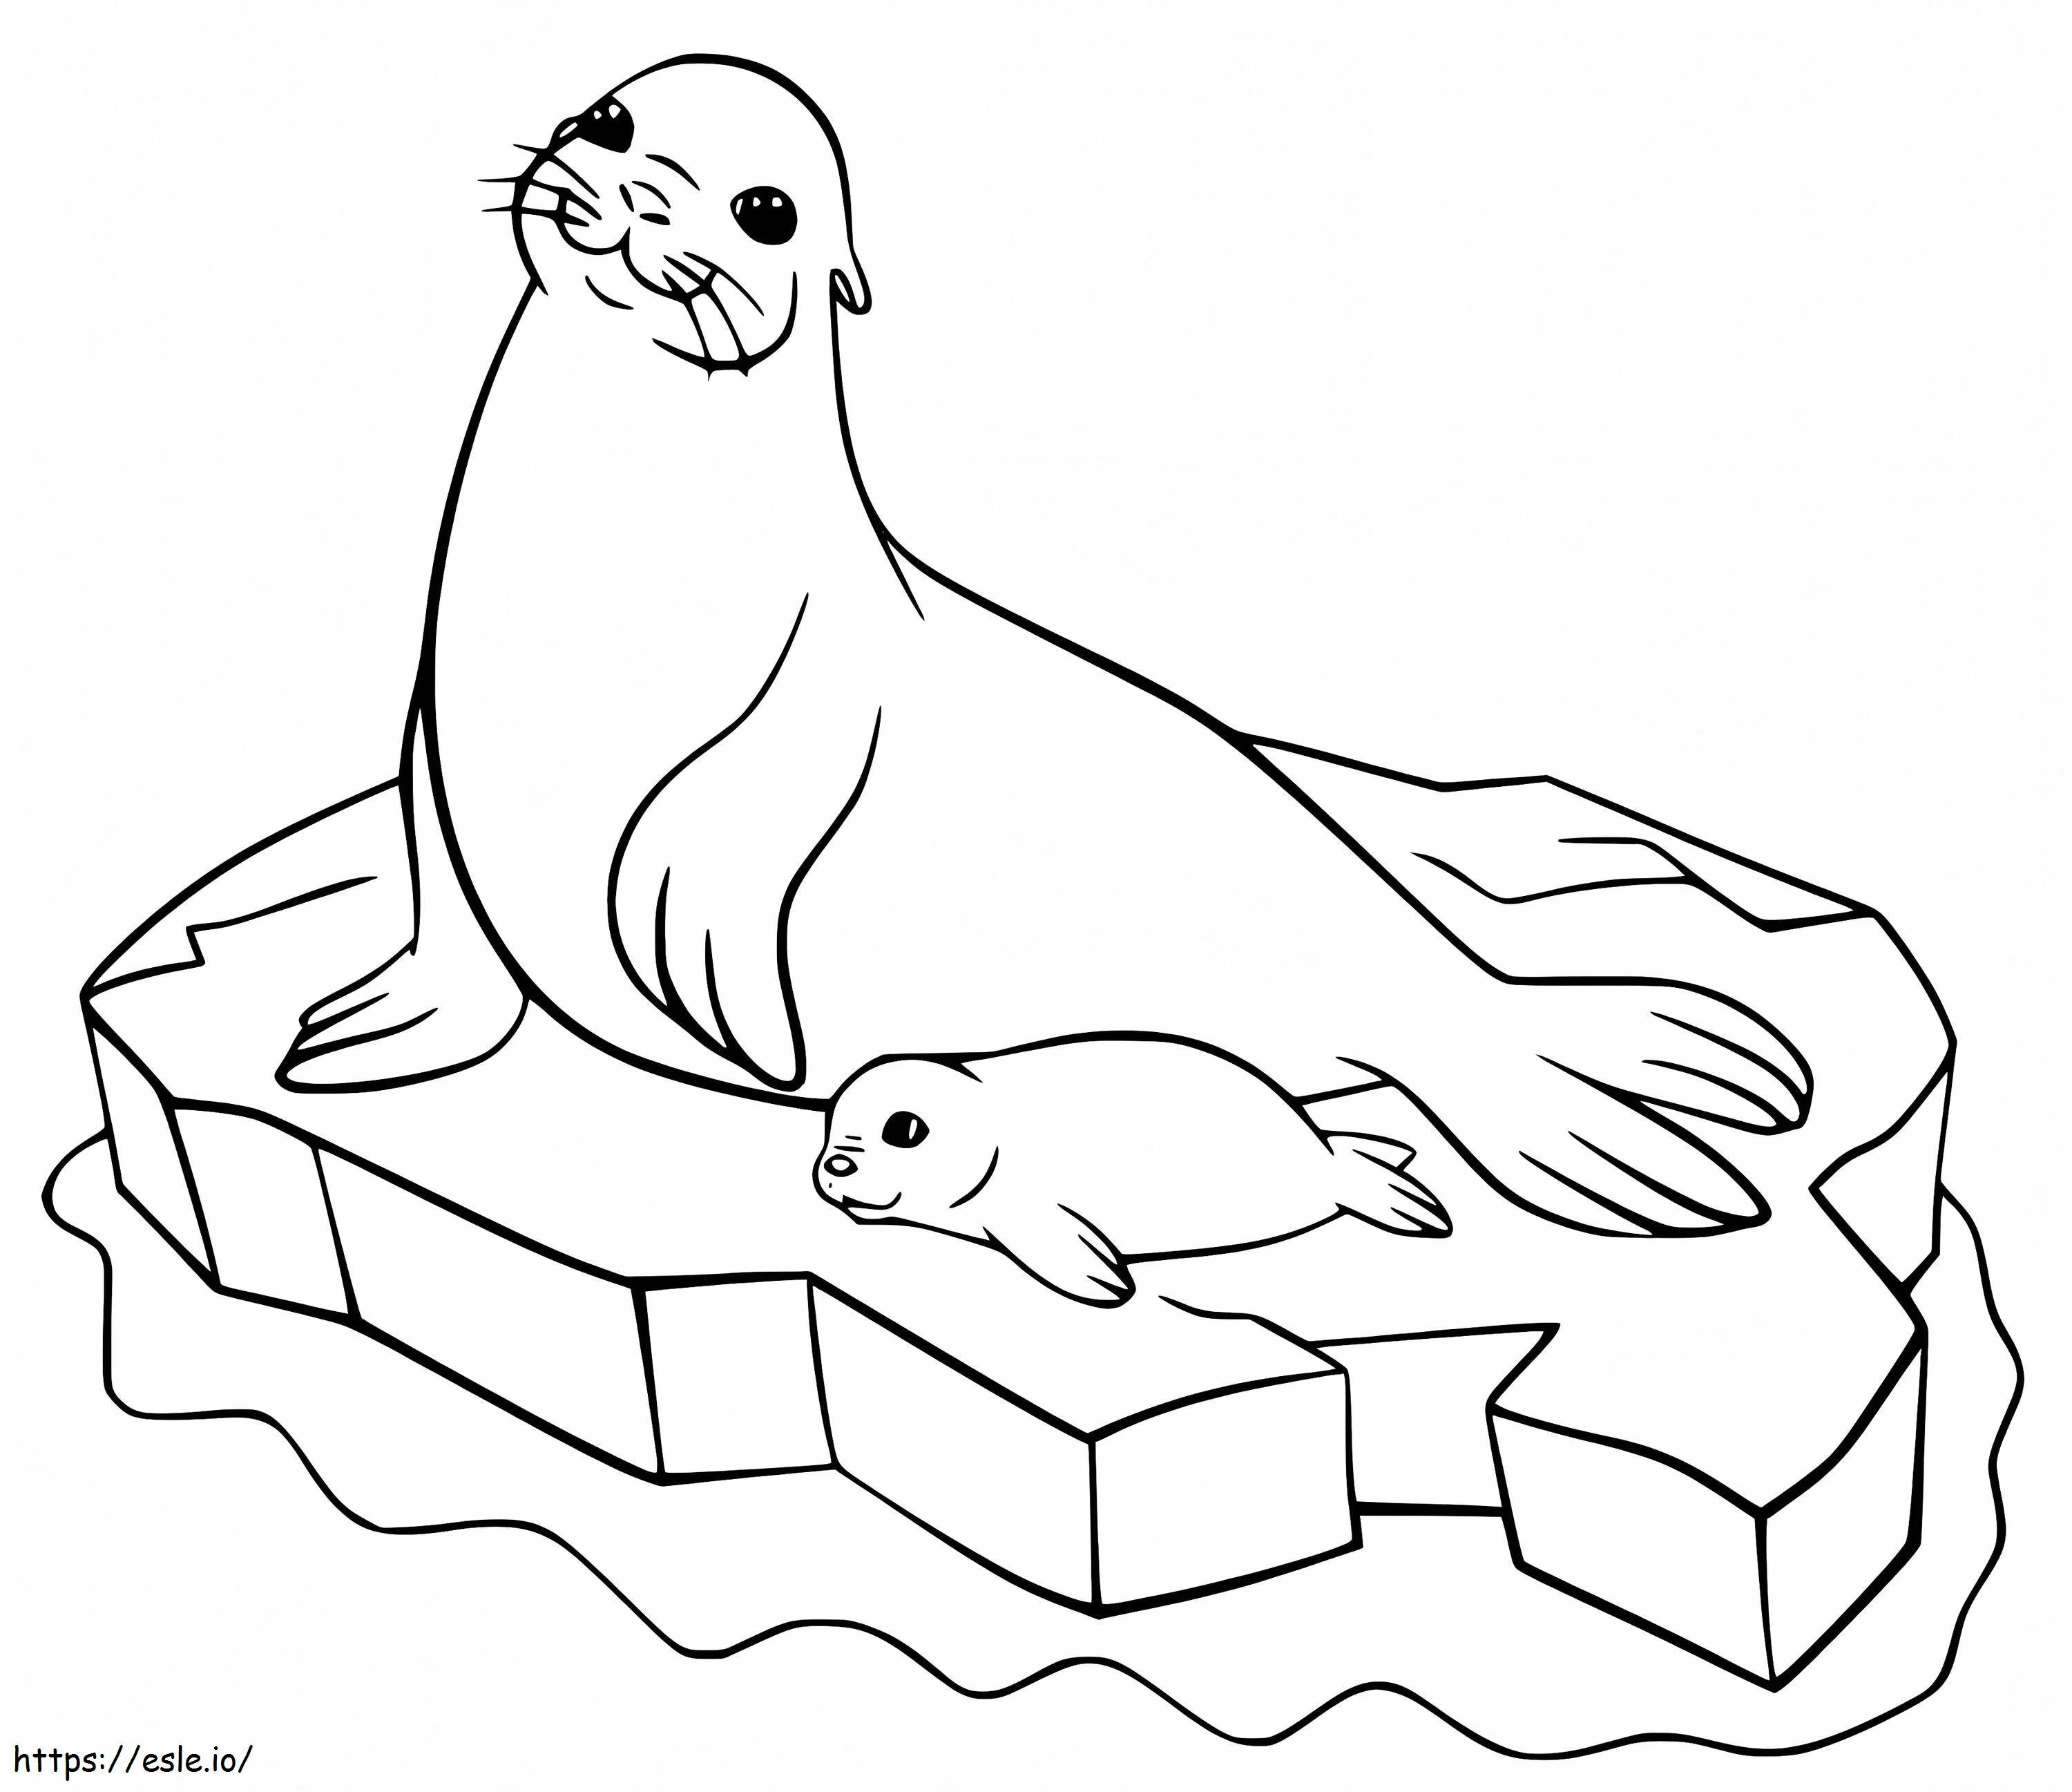 Sea Lions On Ice coloring page